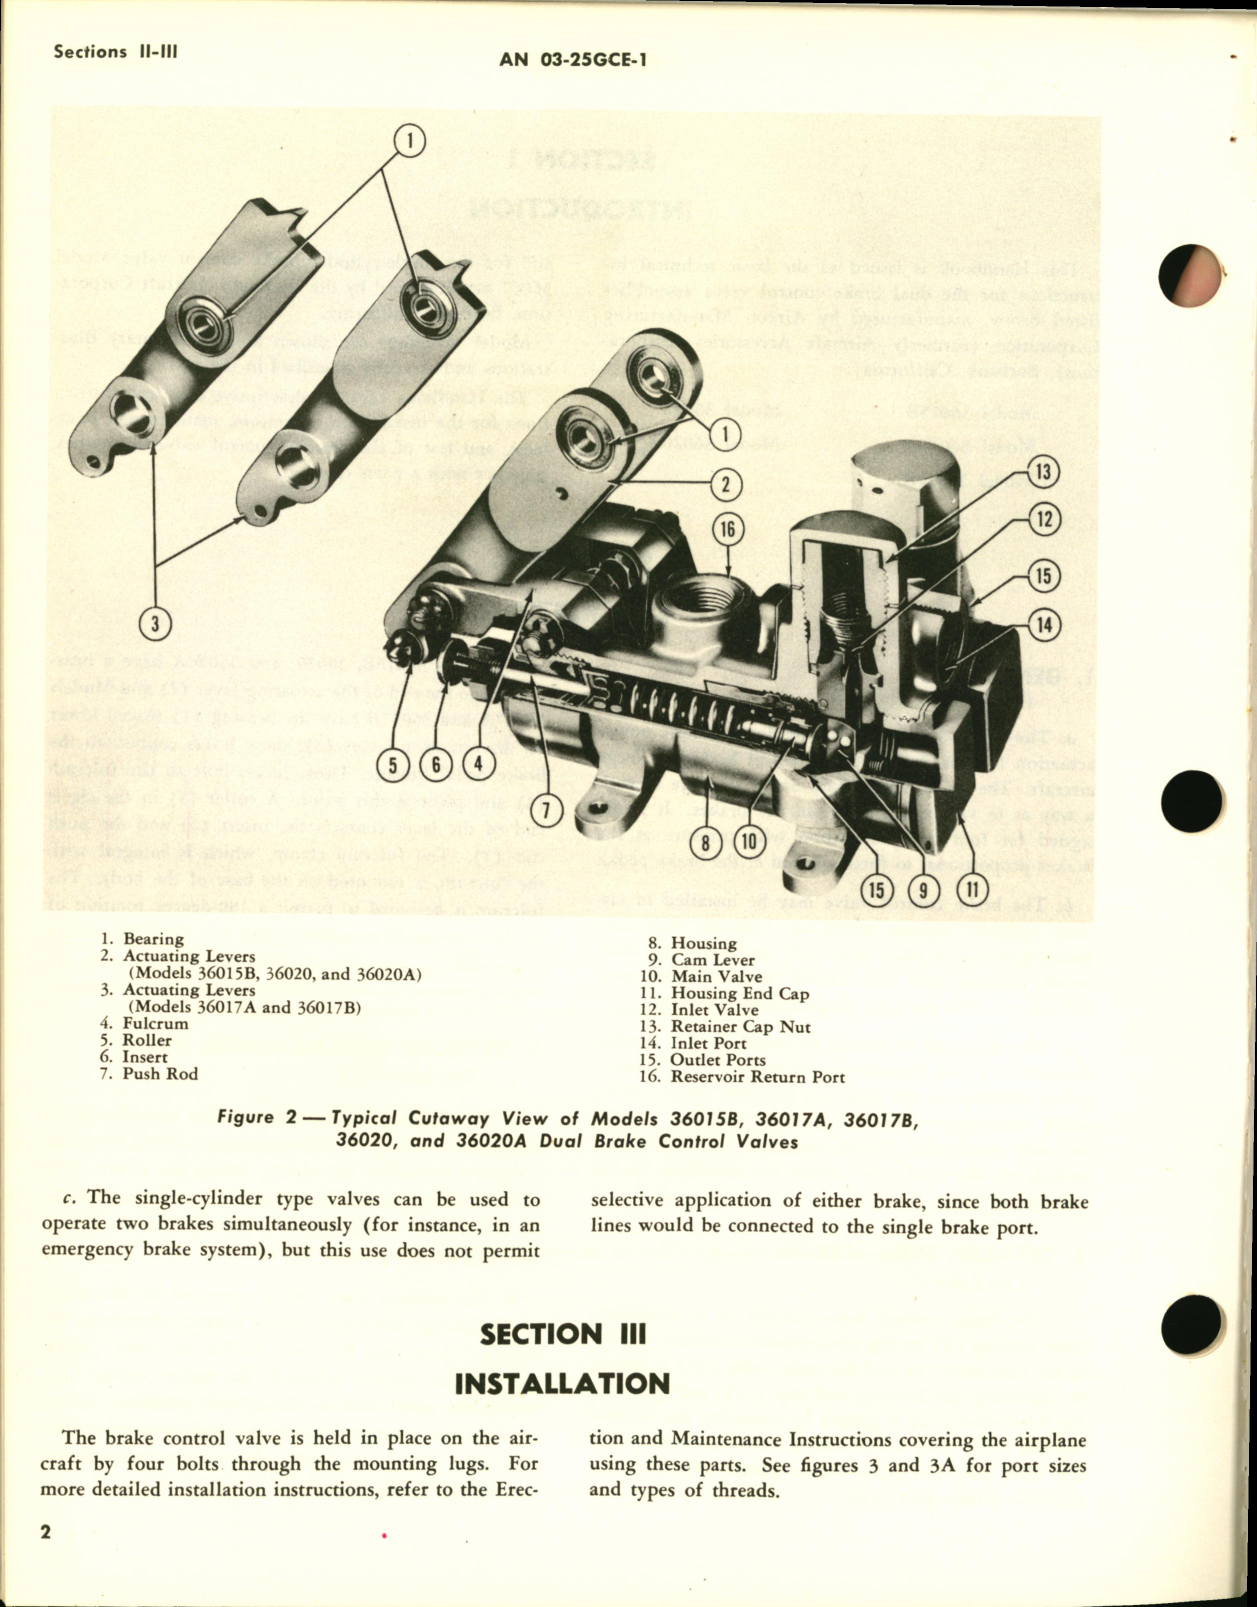 Sample page 8 from AirCorps Library document: Operation, Service, & Overhaul Instructions with Parts Catalog for Brake Control Valves